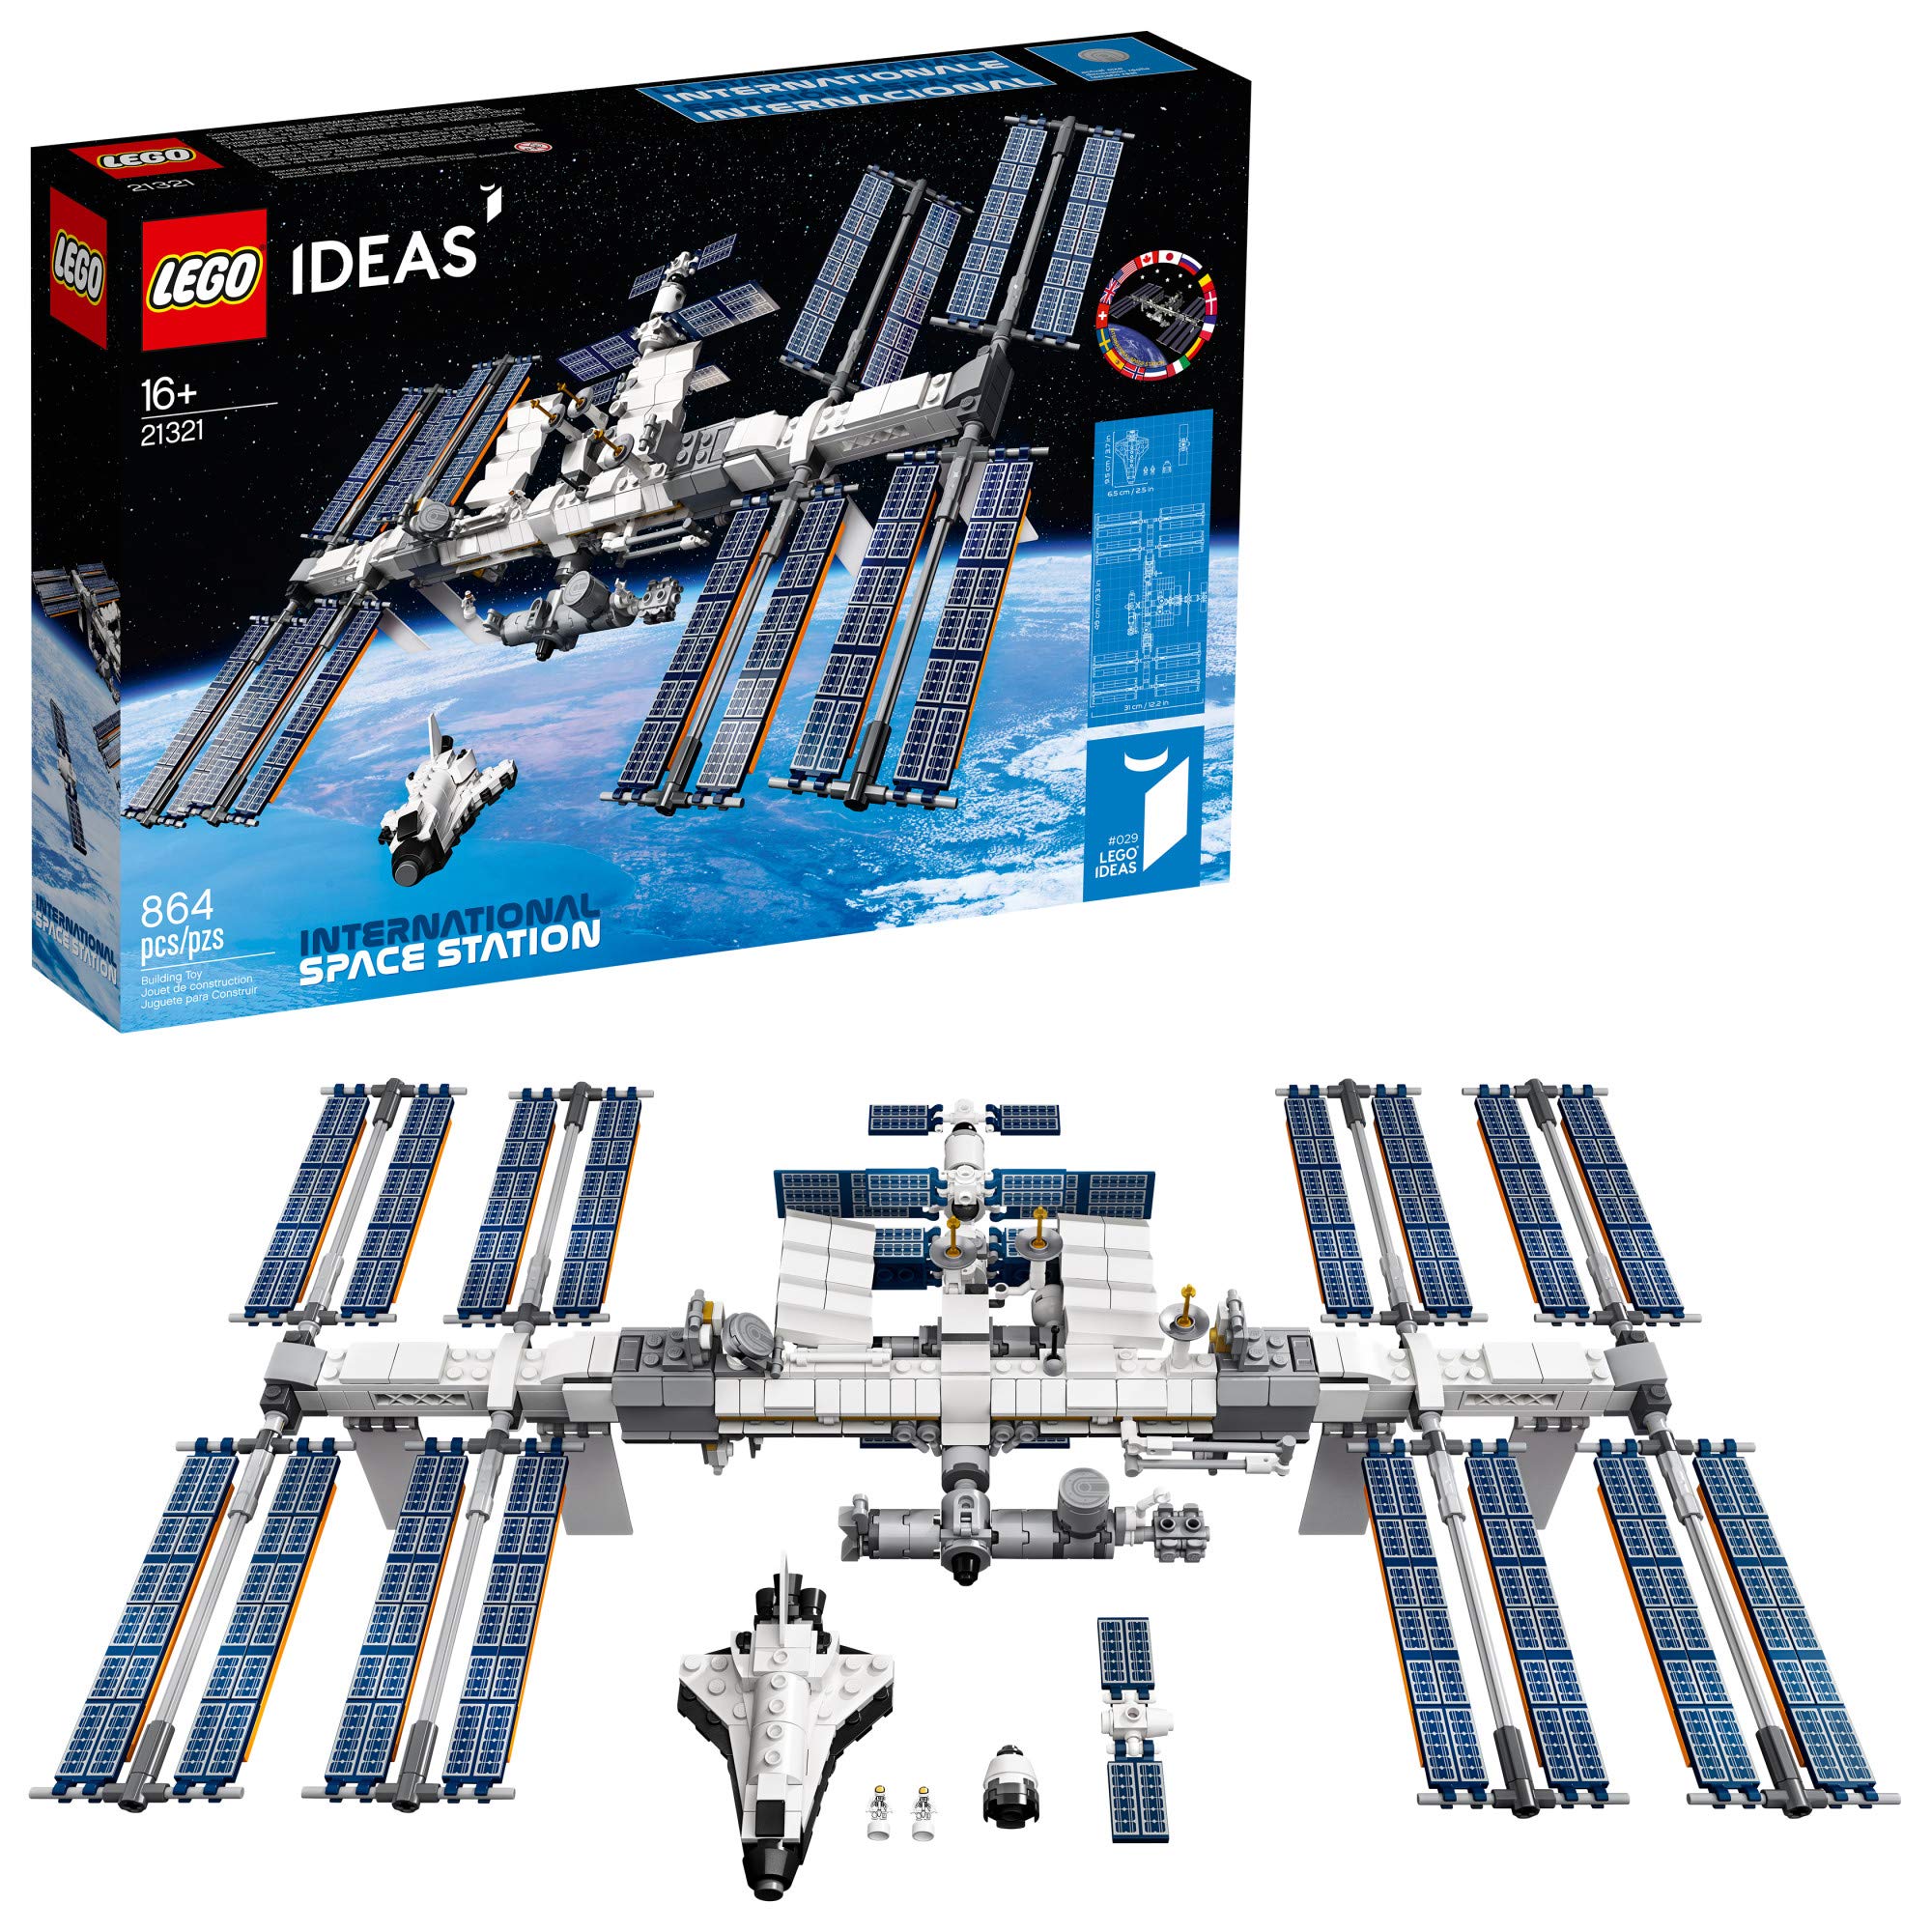 LEGO Ideas International Space Station 21321 Building Kit, Adult Set for Display, Makes a Great Birthday Present (864 Pieces) (Like New, Open Box)